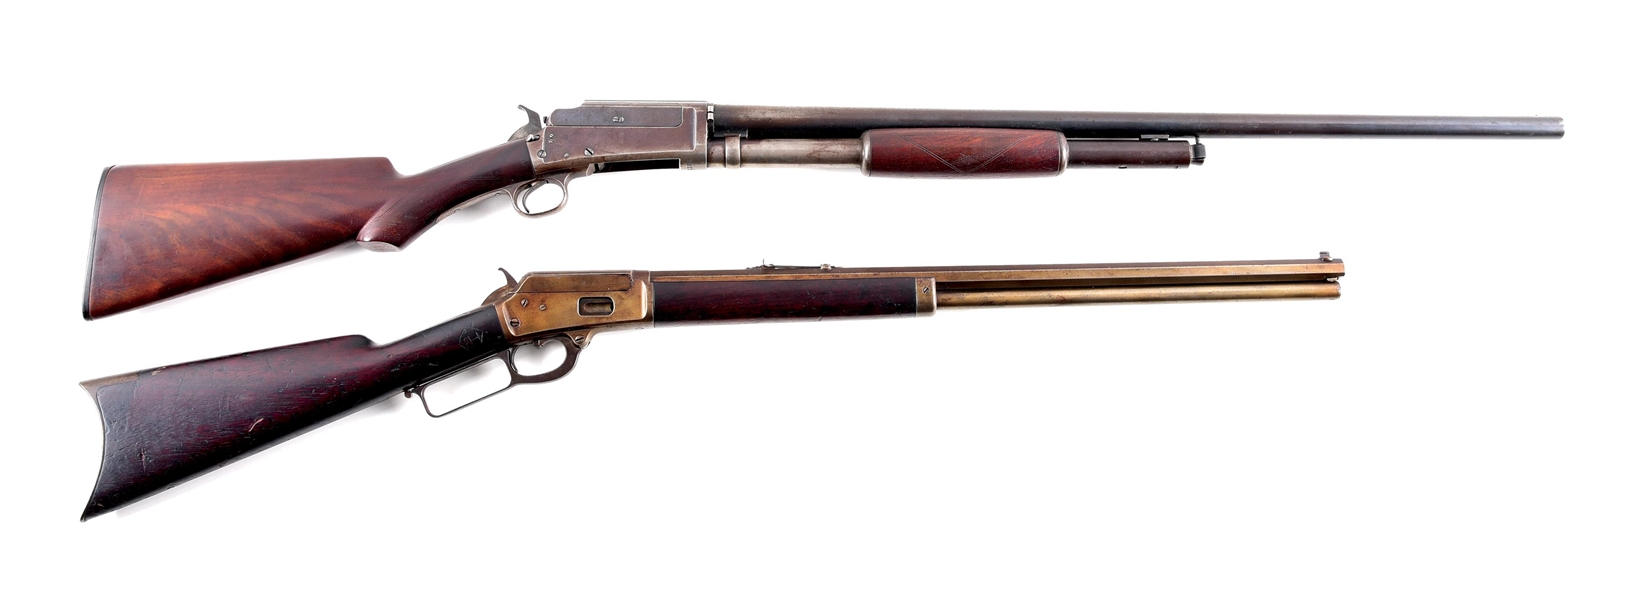 (C+A) LOT OF 2: MARLIN MODEL 24 SHOTGUN AND 1889 LEVER ACTION RIFLE.